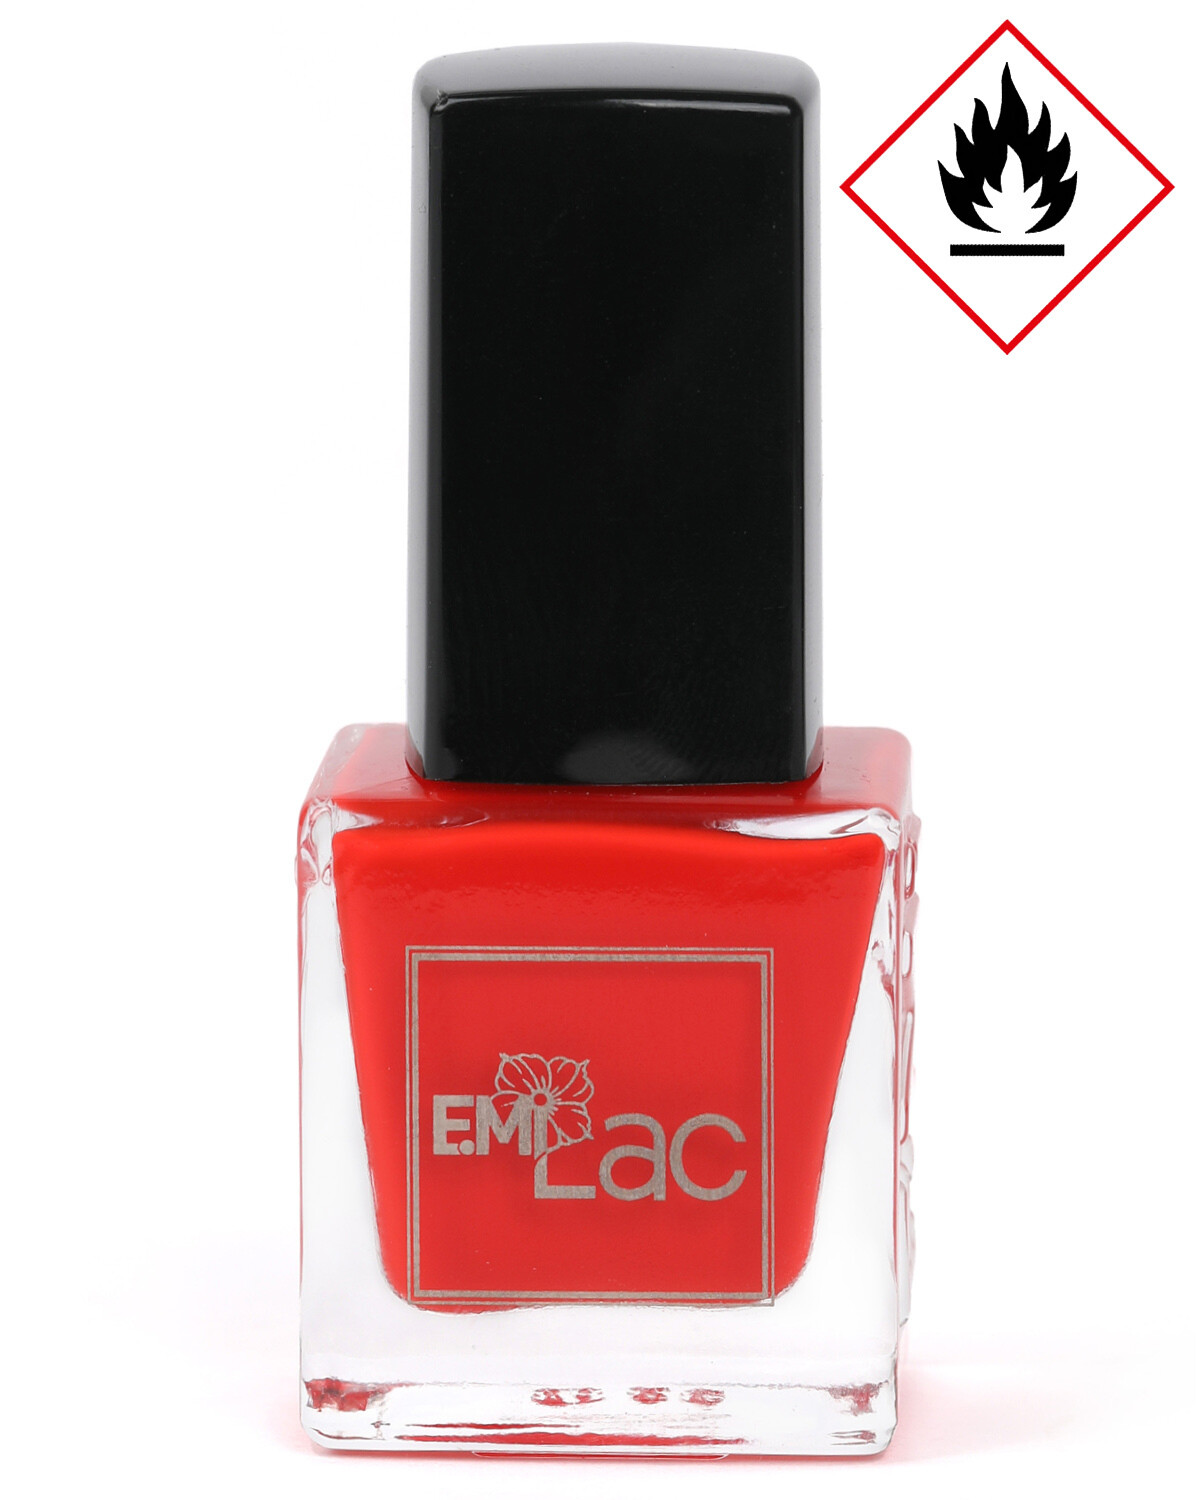 Nail Polish for Stamping Red #6, 9 ml.